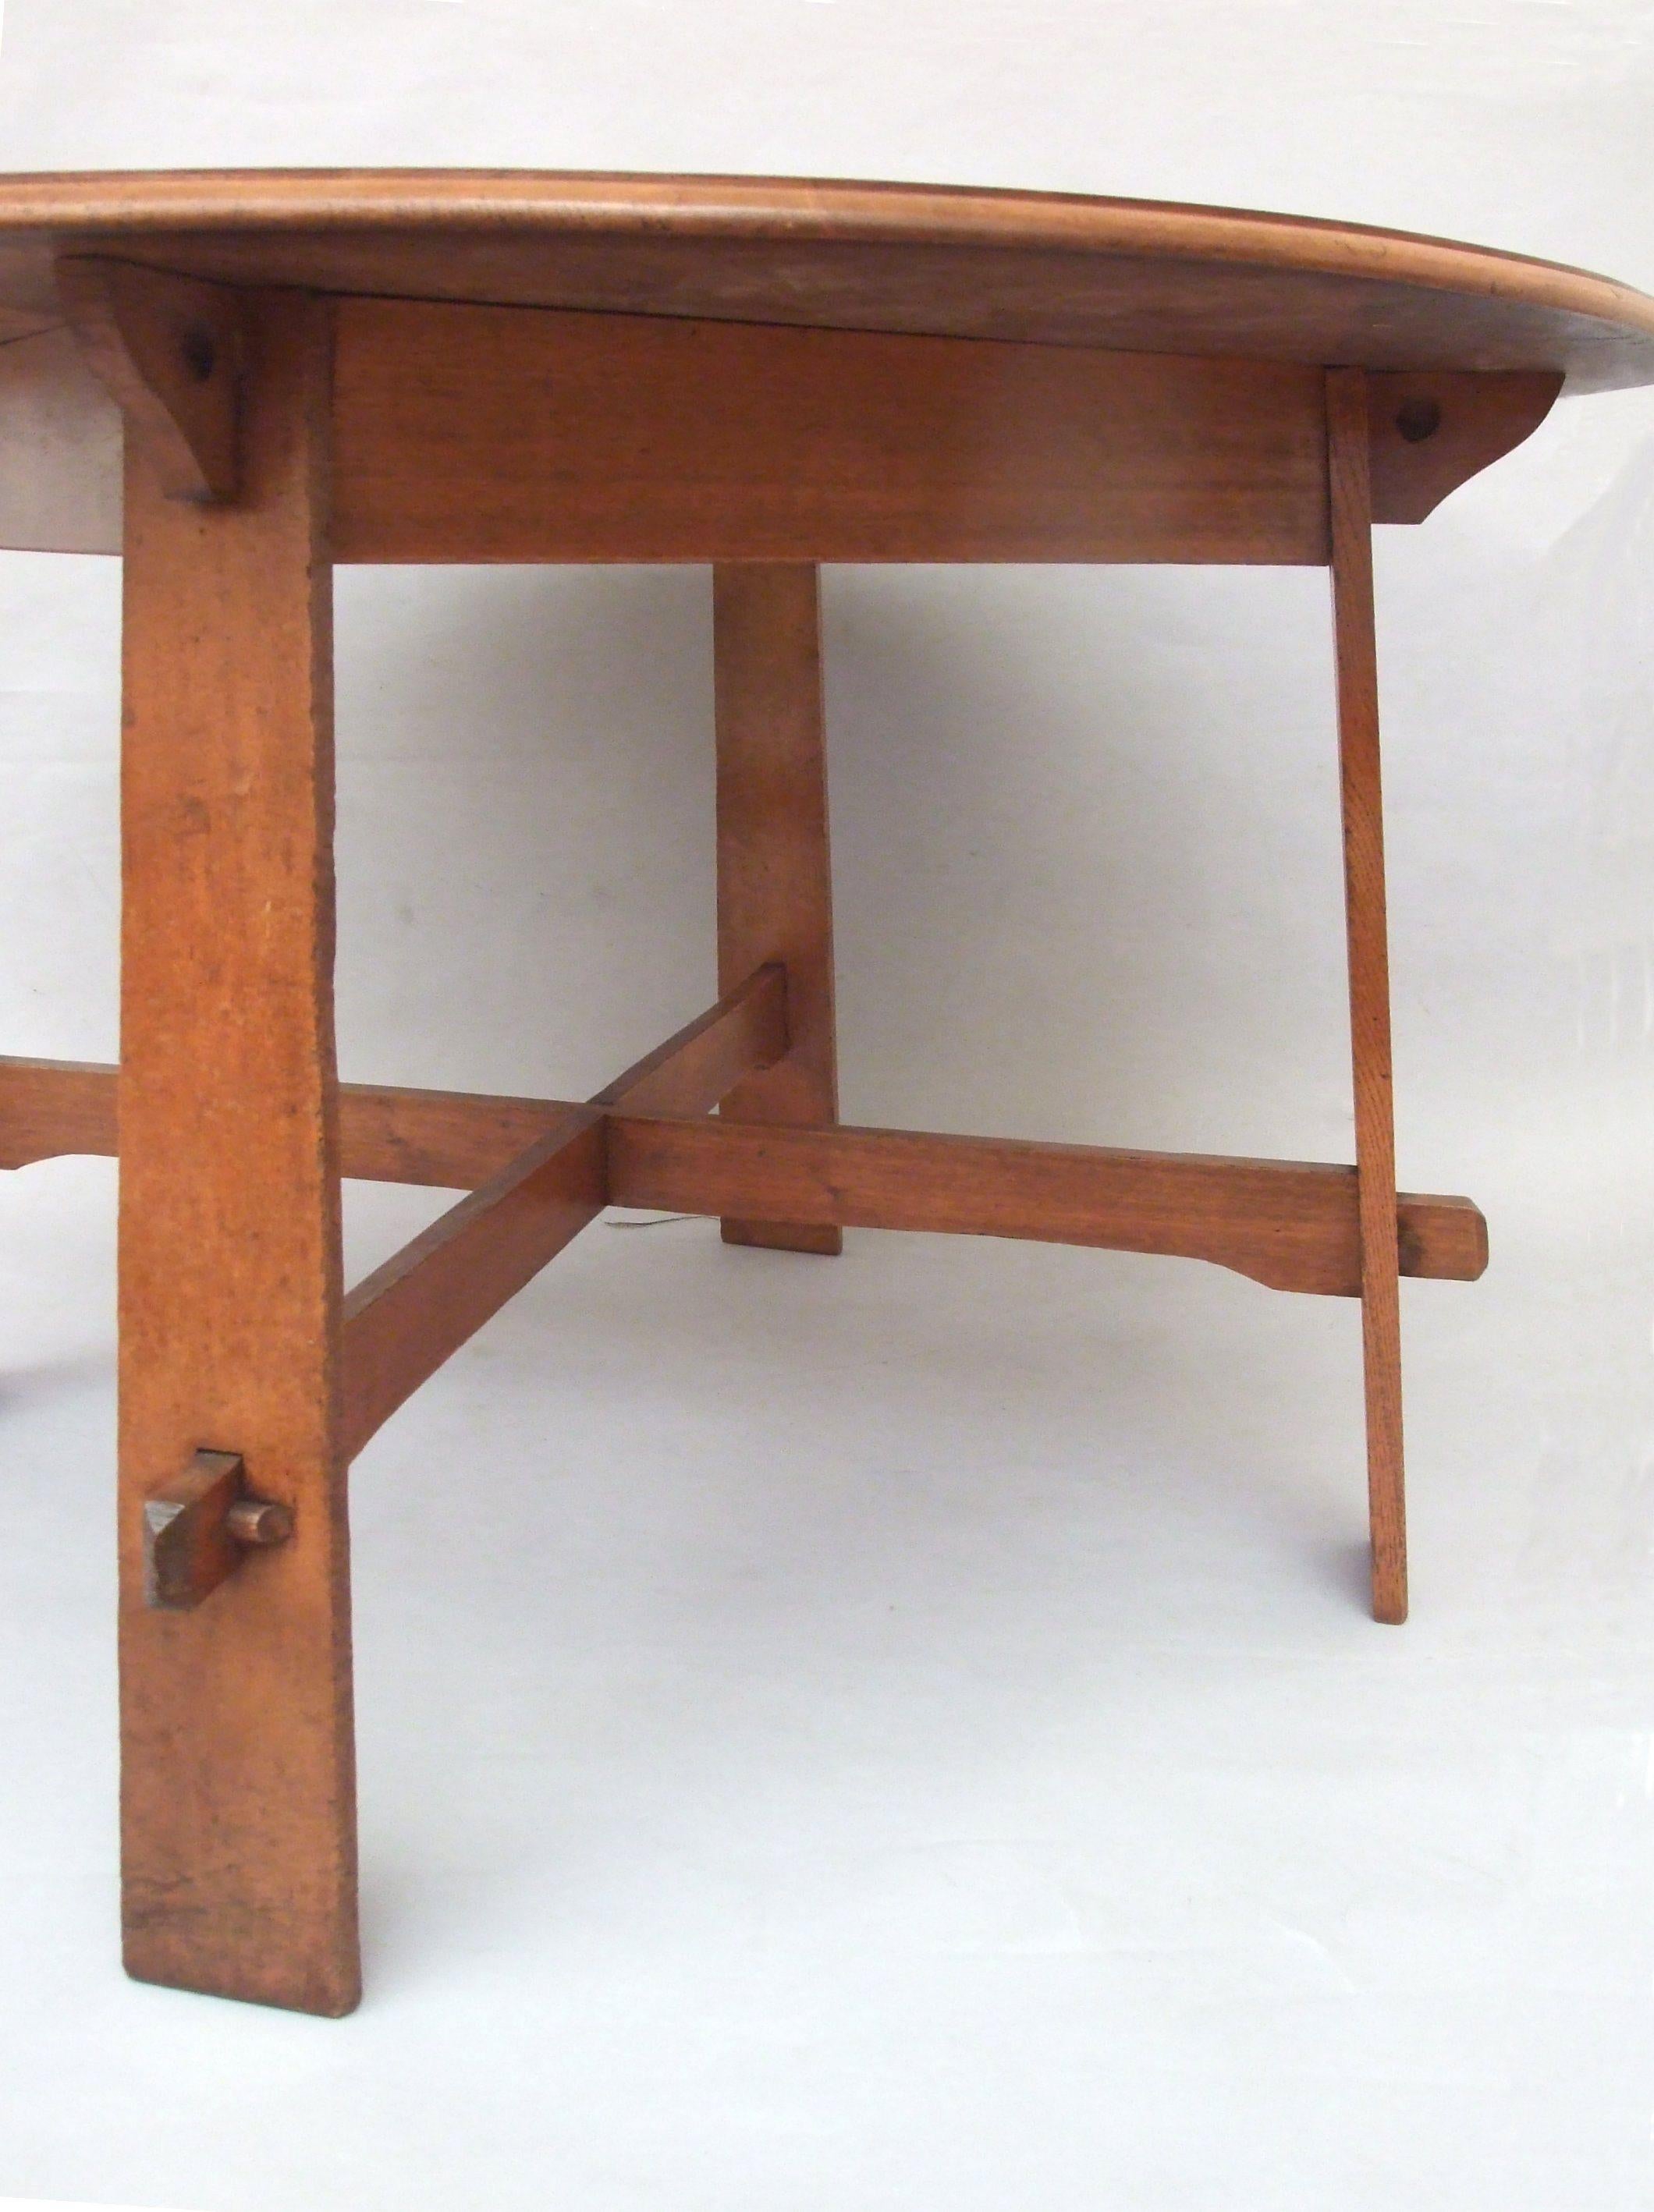 Ambrose Heal an oak, Arts & Crafts, round dining table, molded edge and bracket supports to the table top, four tapering 'plank' legs, with pegged cross-stretchers, 'No 8' in Heal's archive, designed by Ambrose Heal, first produced in 1908, circa